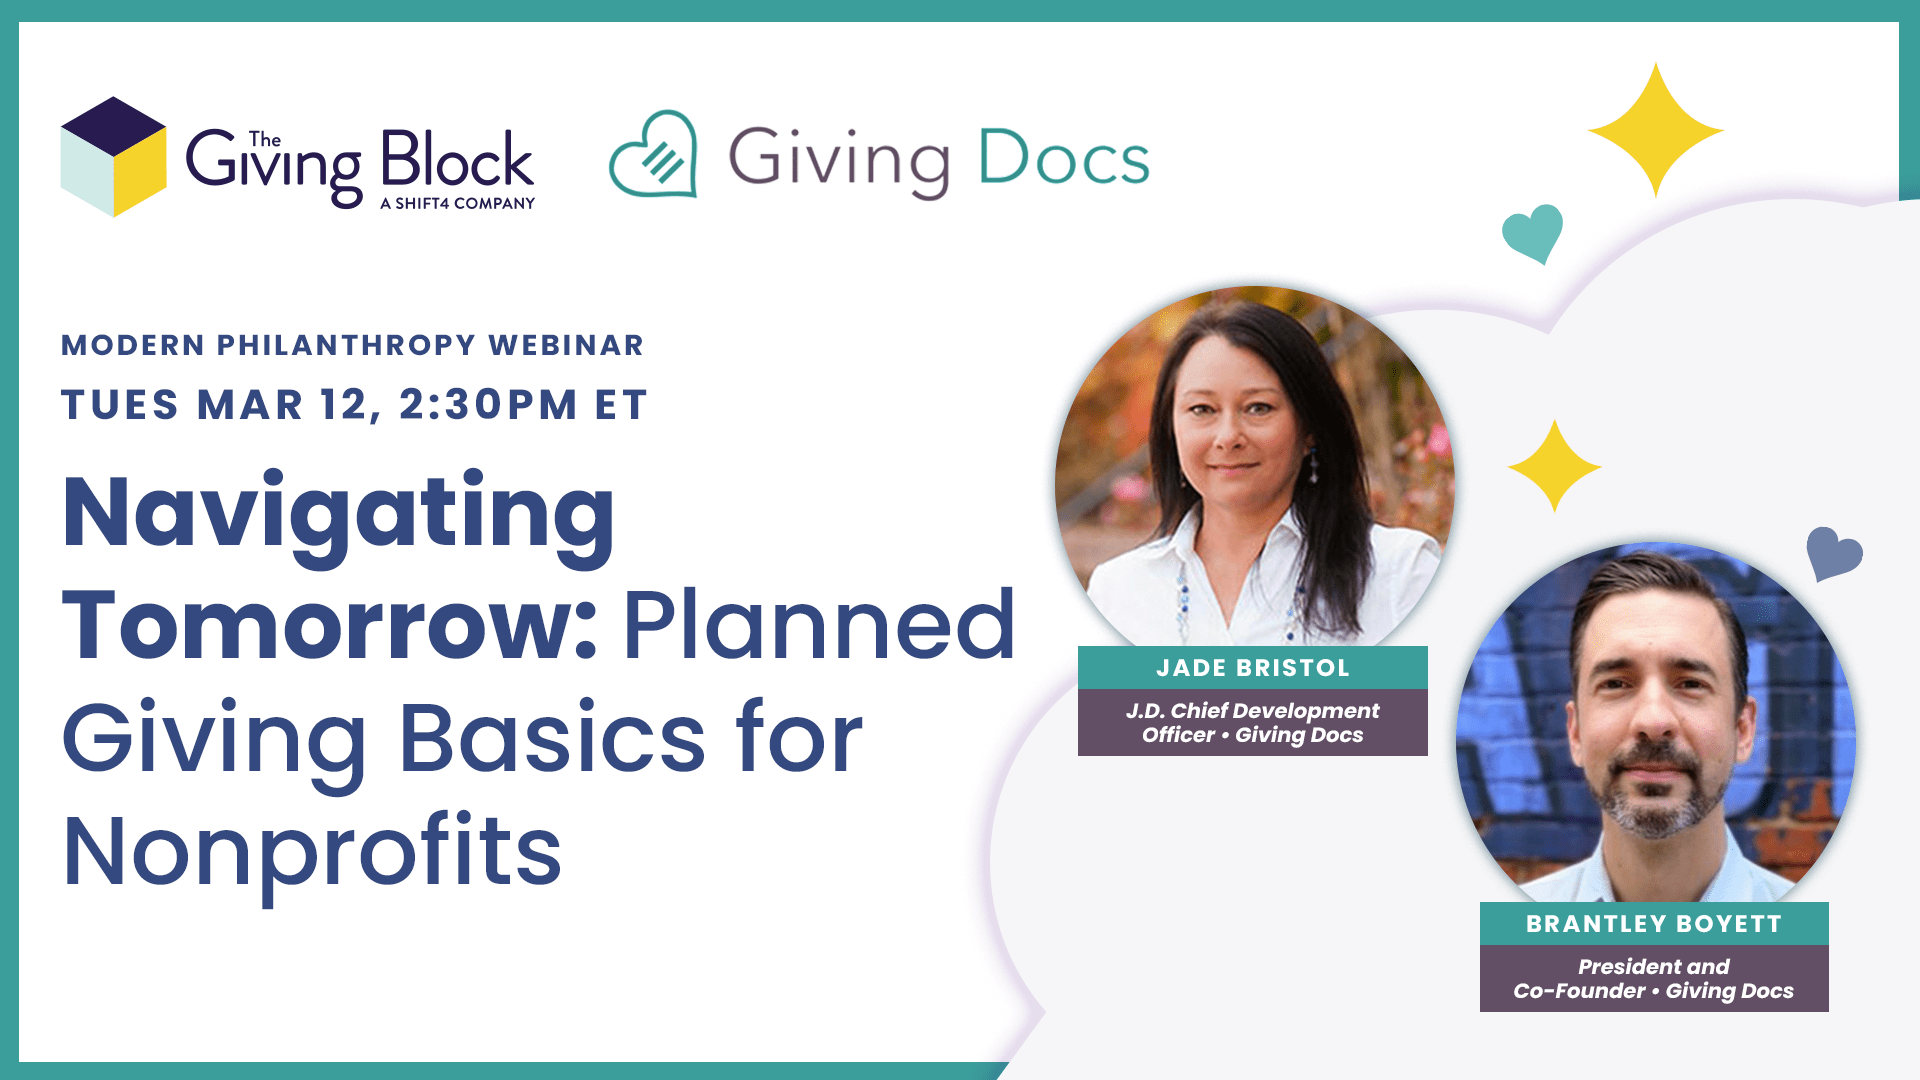 WEBINAR Planned Giving Basics for Nonprofits - EVENT | The Giving Block